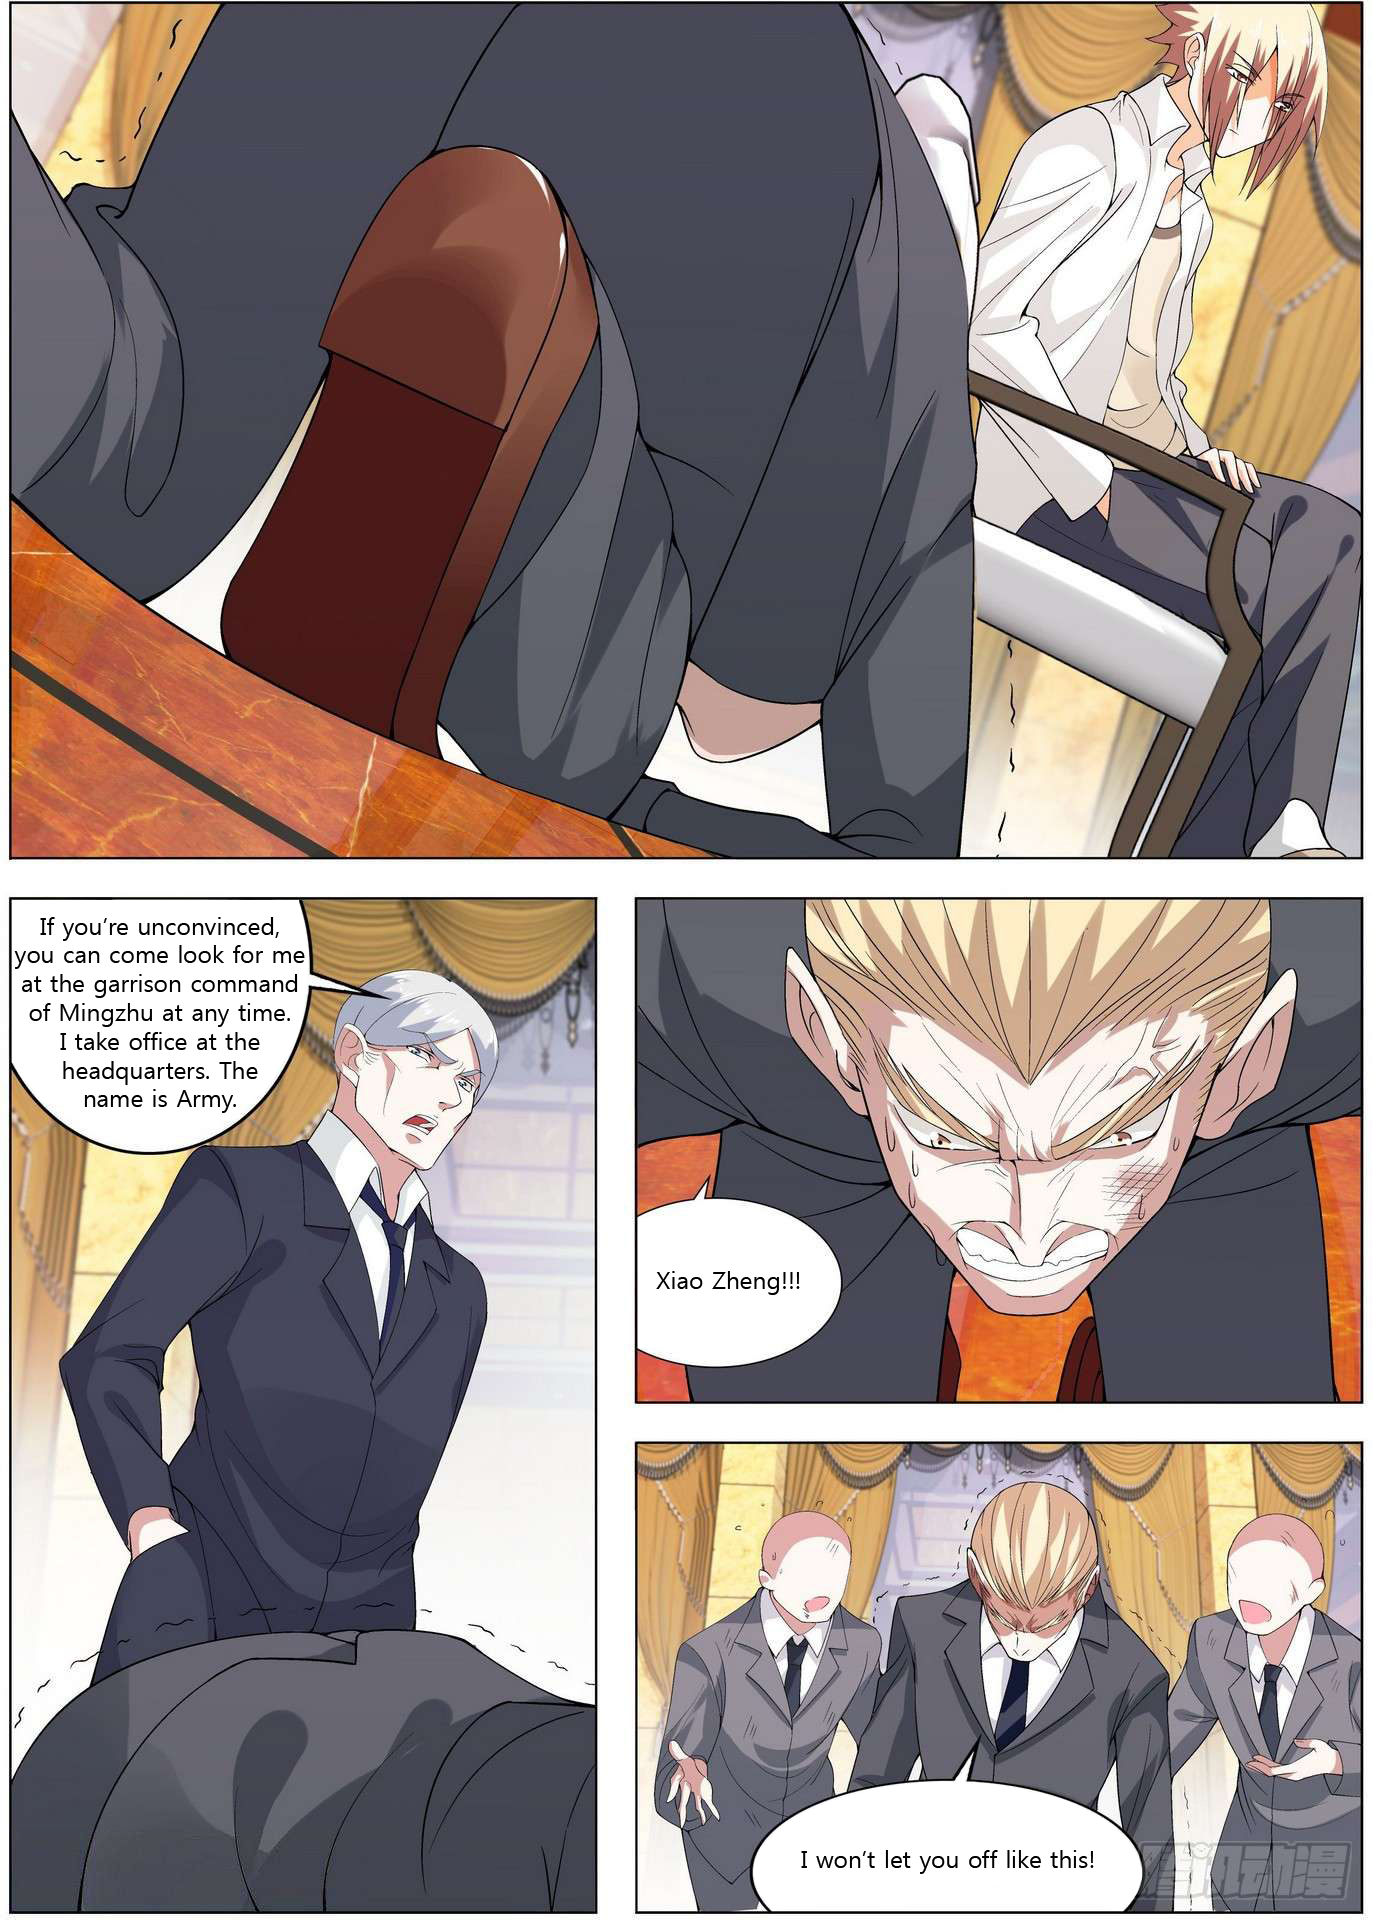 Bodyguard Of The Goddess - Page 2